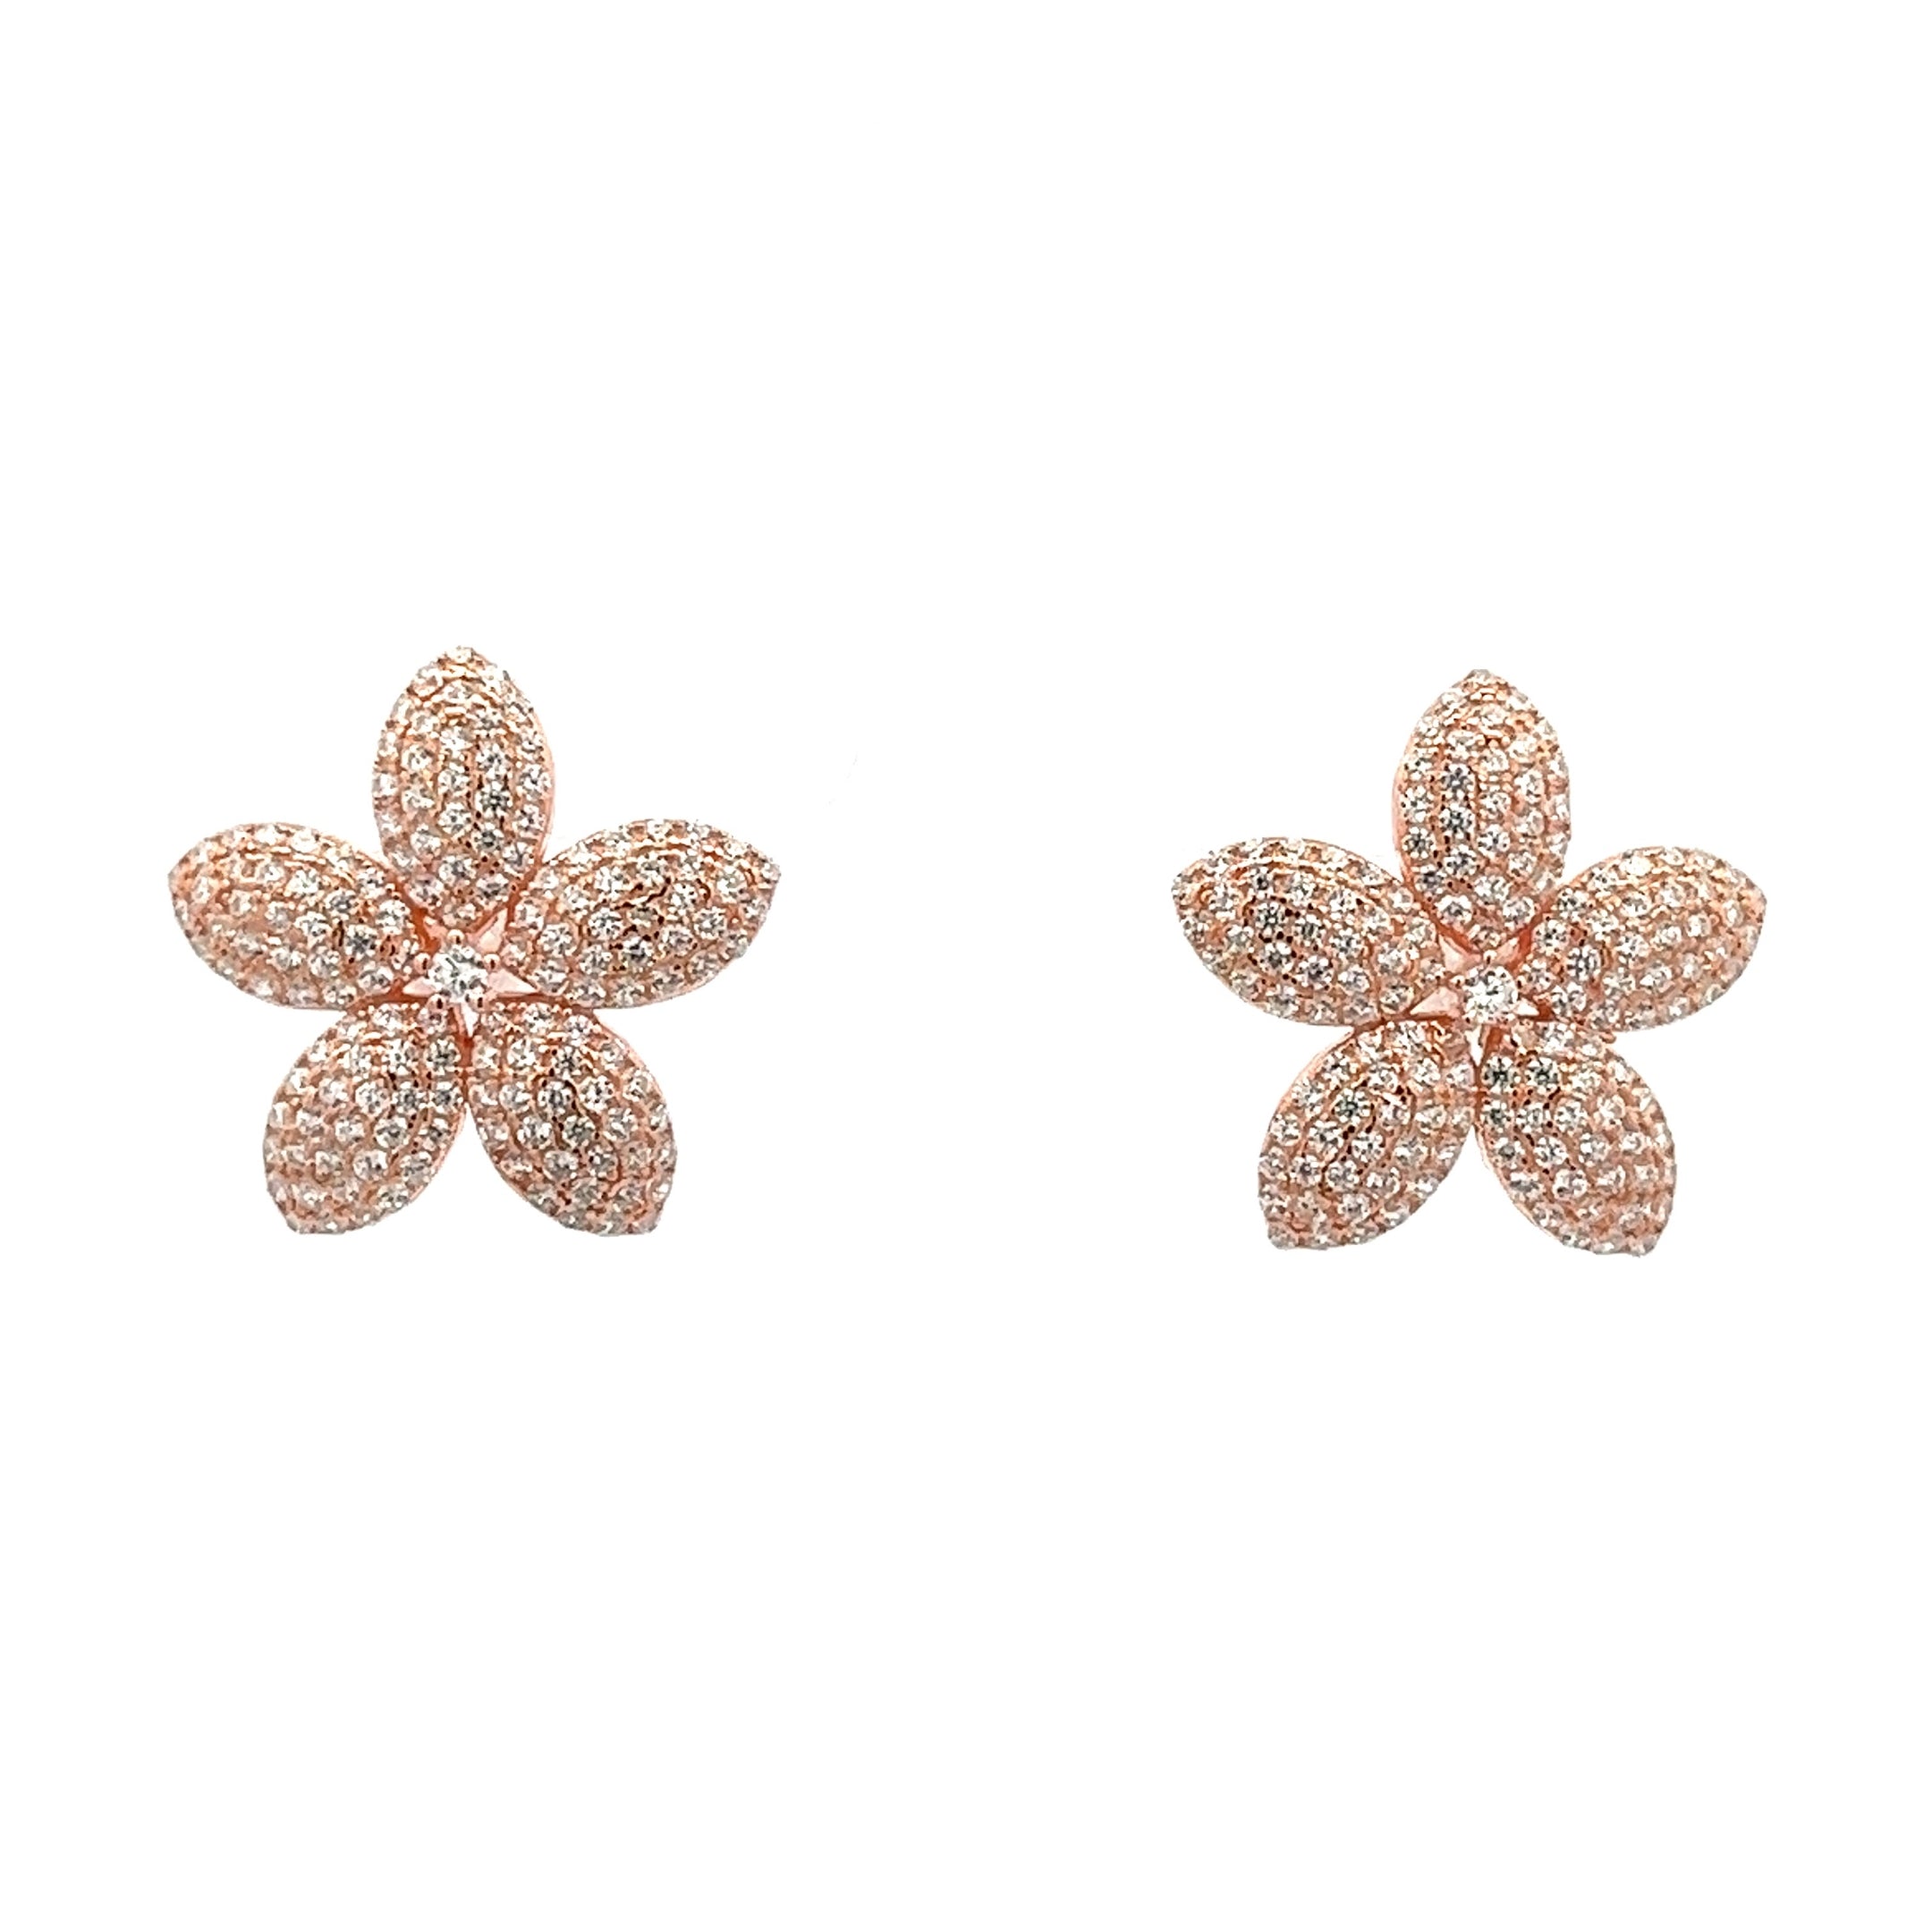 925 ROSE GOLD PLATED FLOWER EARRINGS WITH CRYSTALS